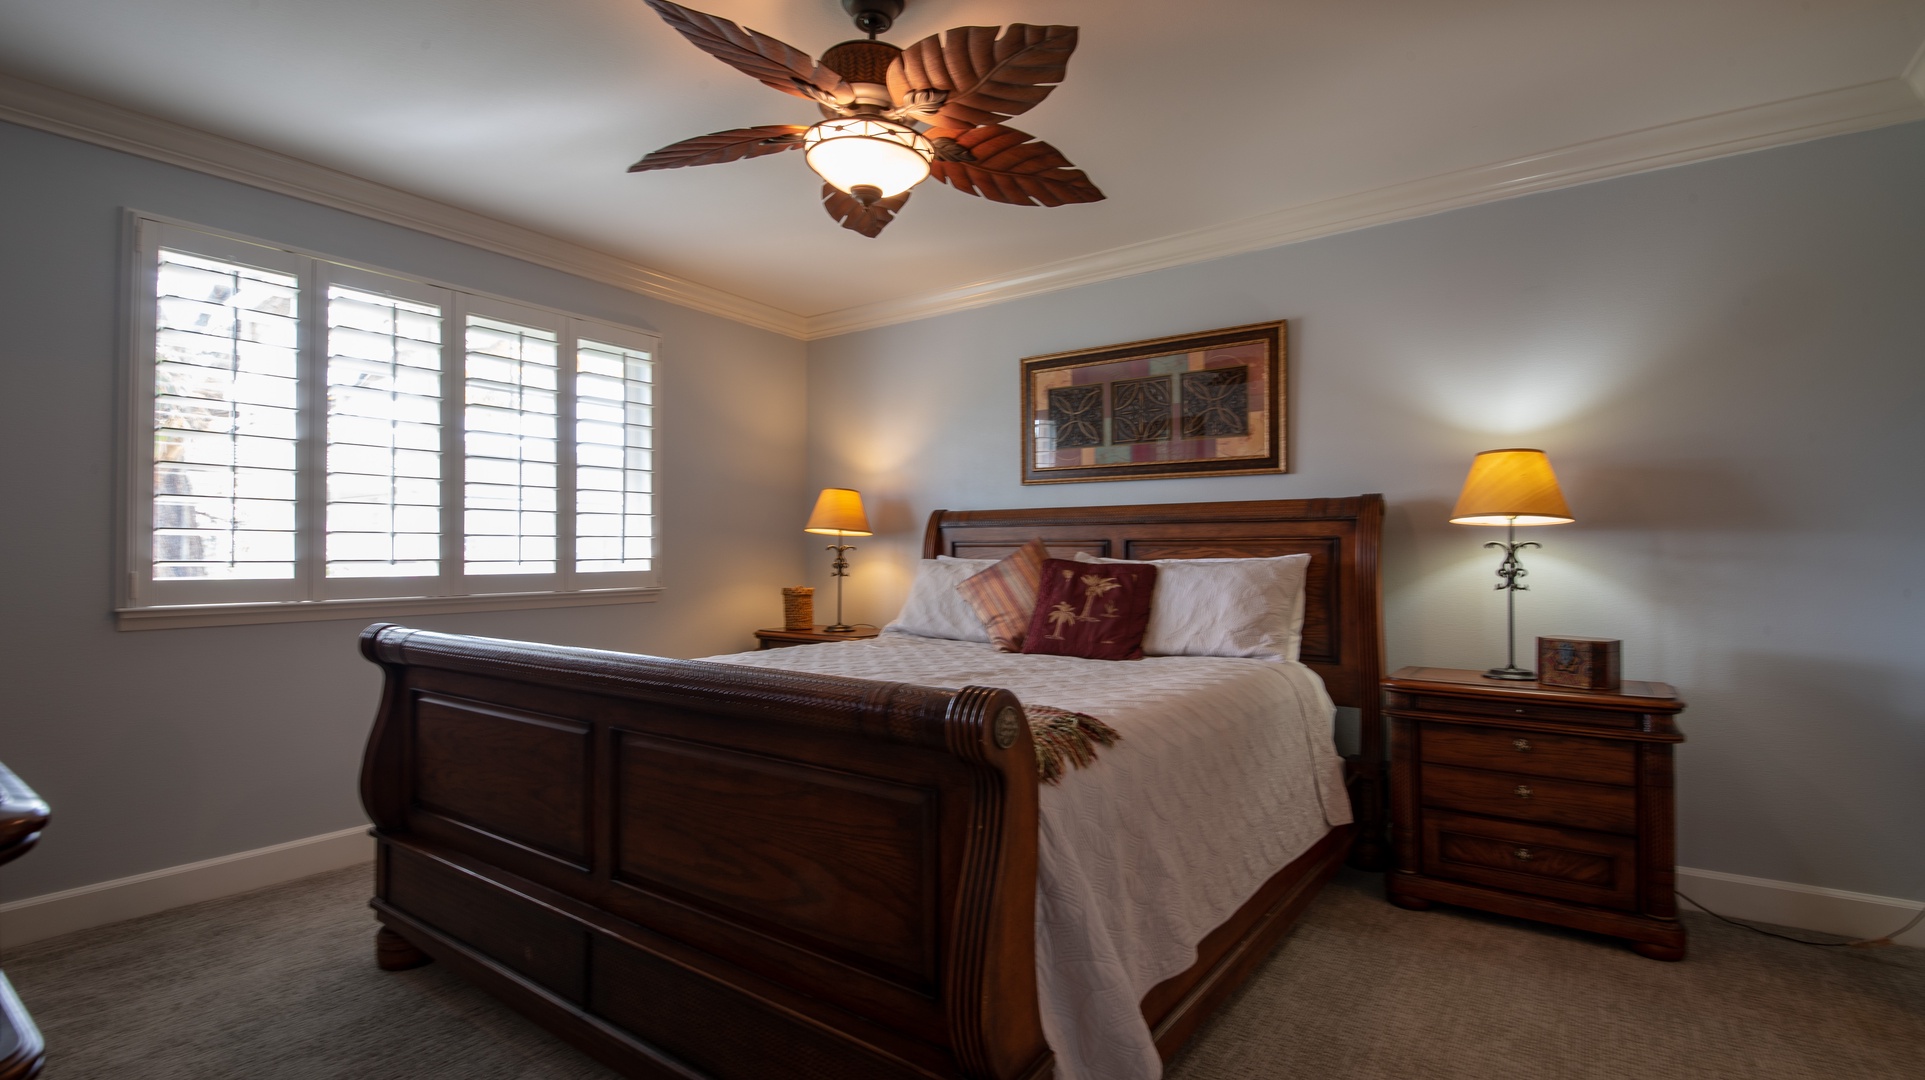 Kapolei Vacation Rentals, Ko Olina Kai 1047B - The spacious primary guest bedroom with soft linens and a ceiling fan.